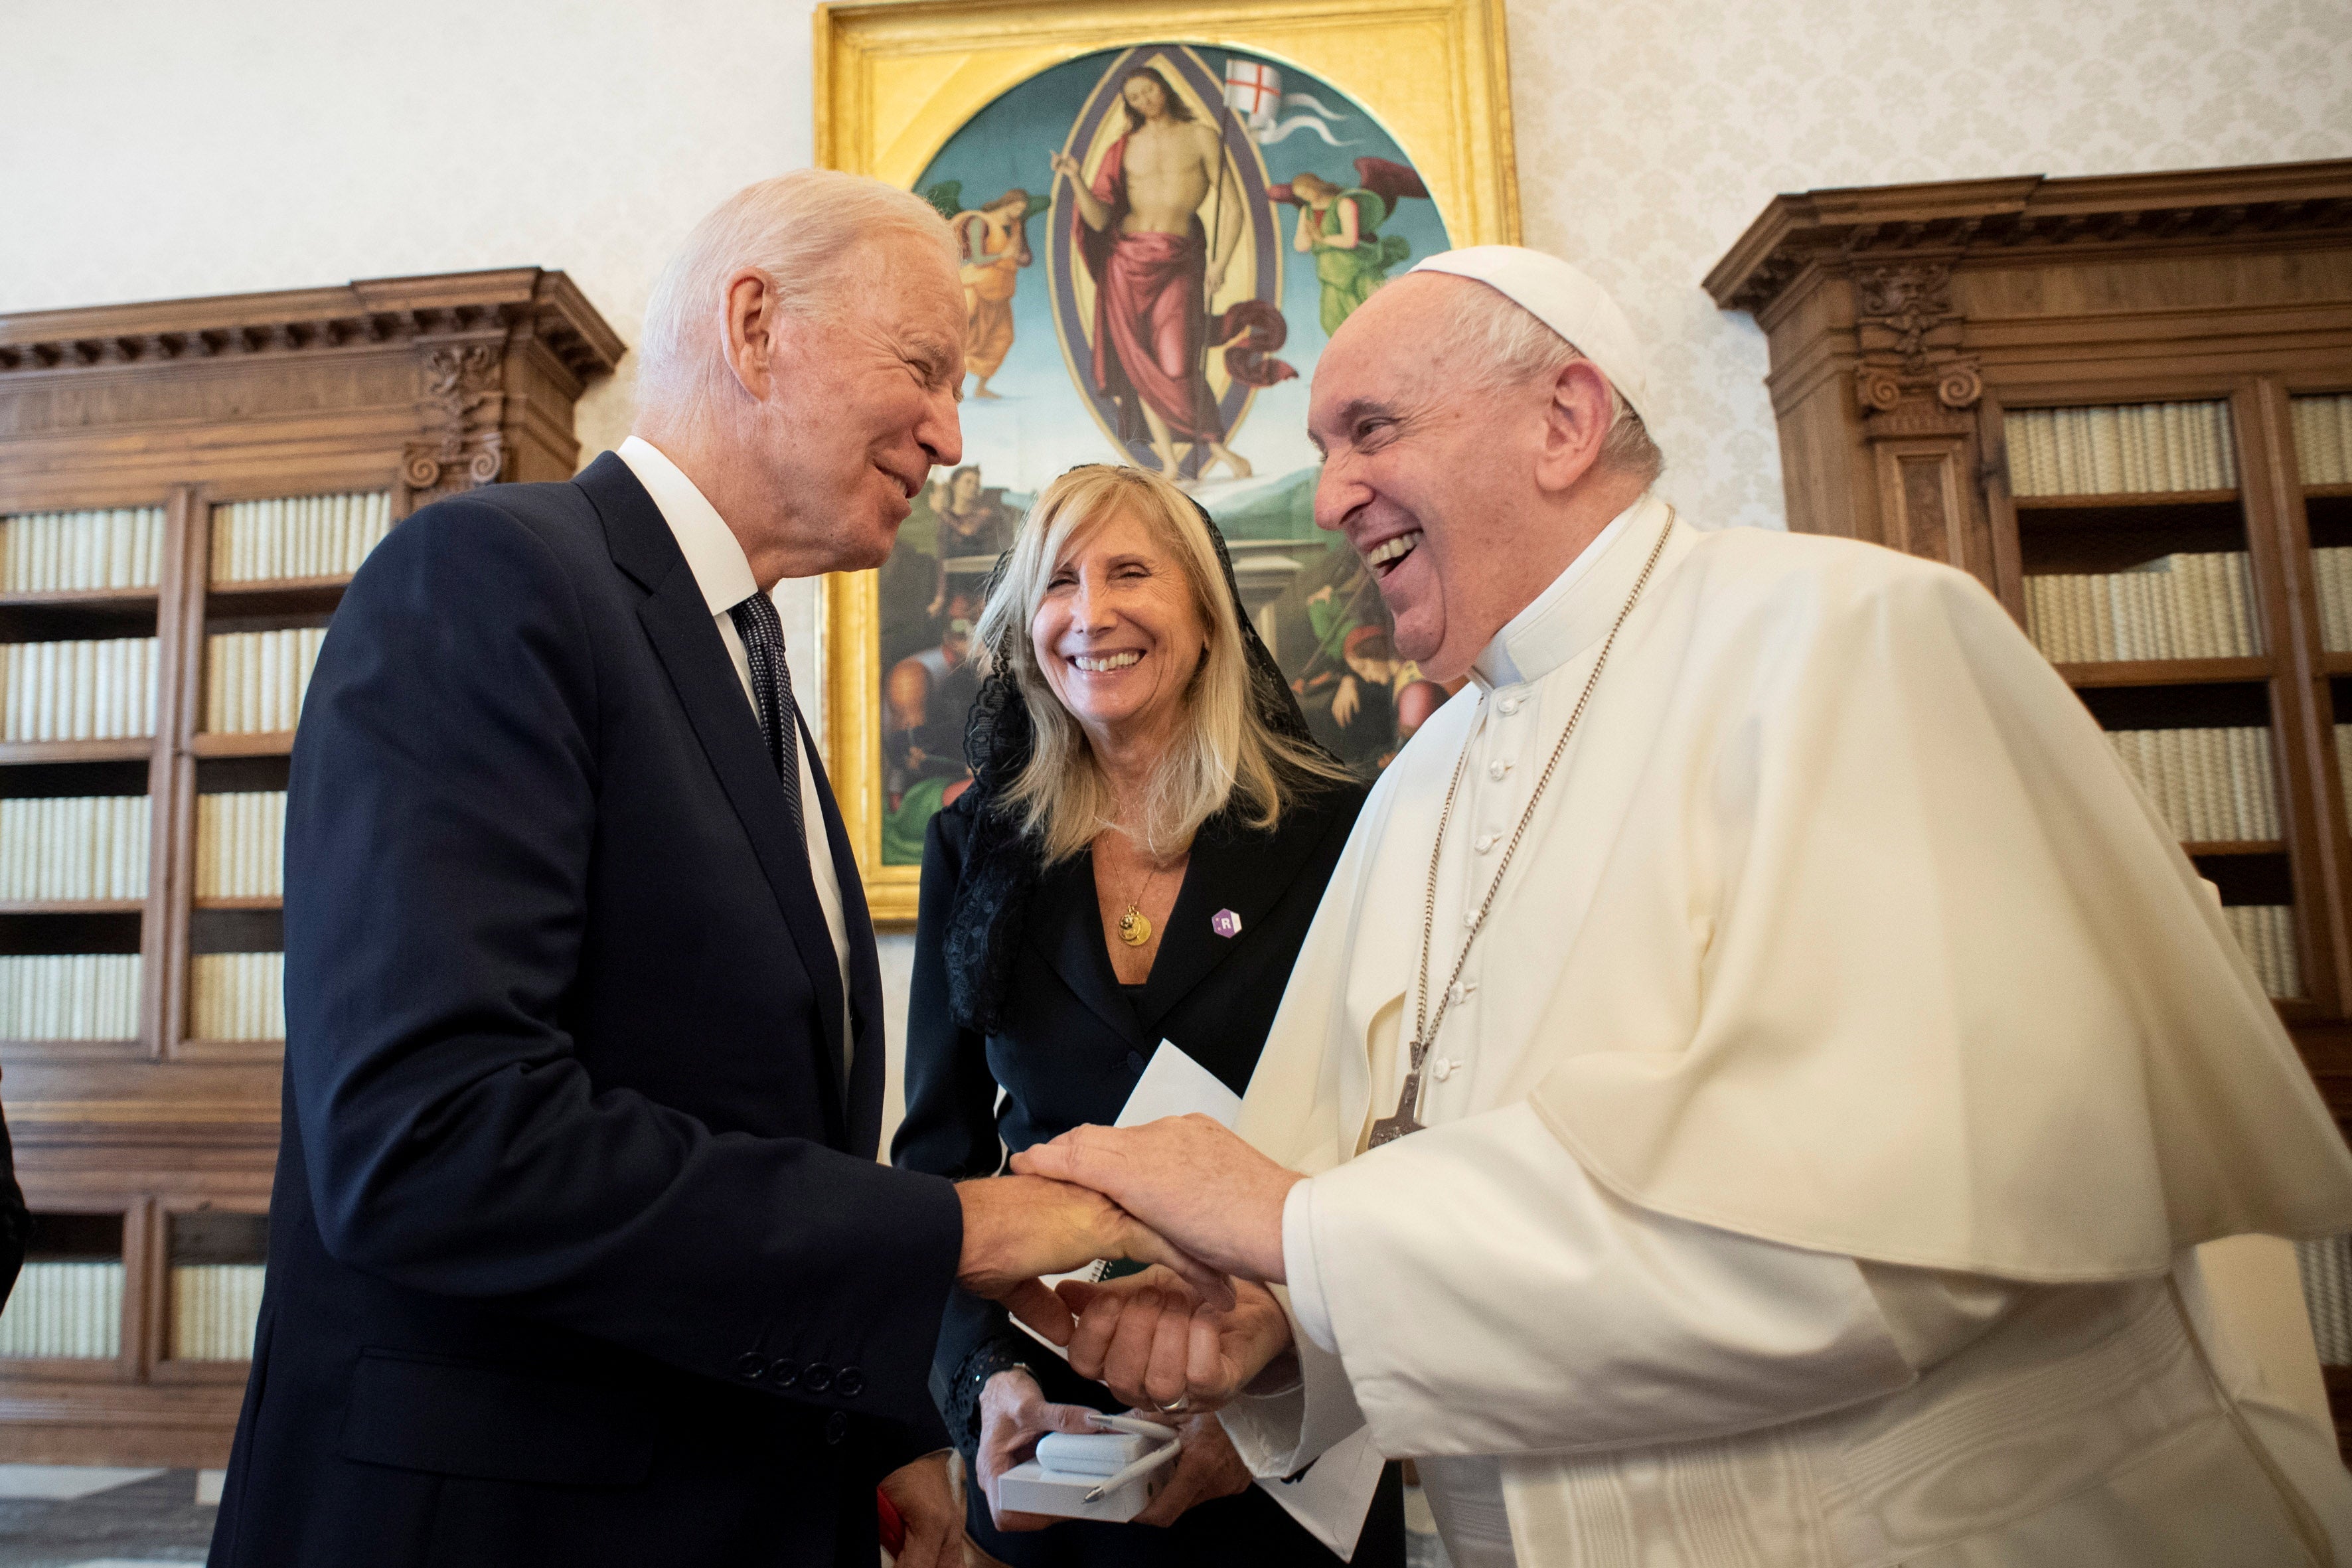 Pope Francis and Joe Biden hold each other's hands while talking and smiling.